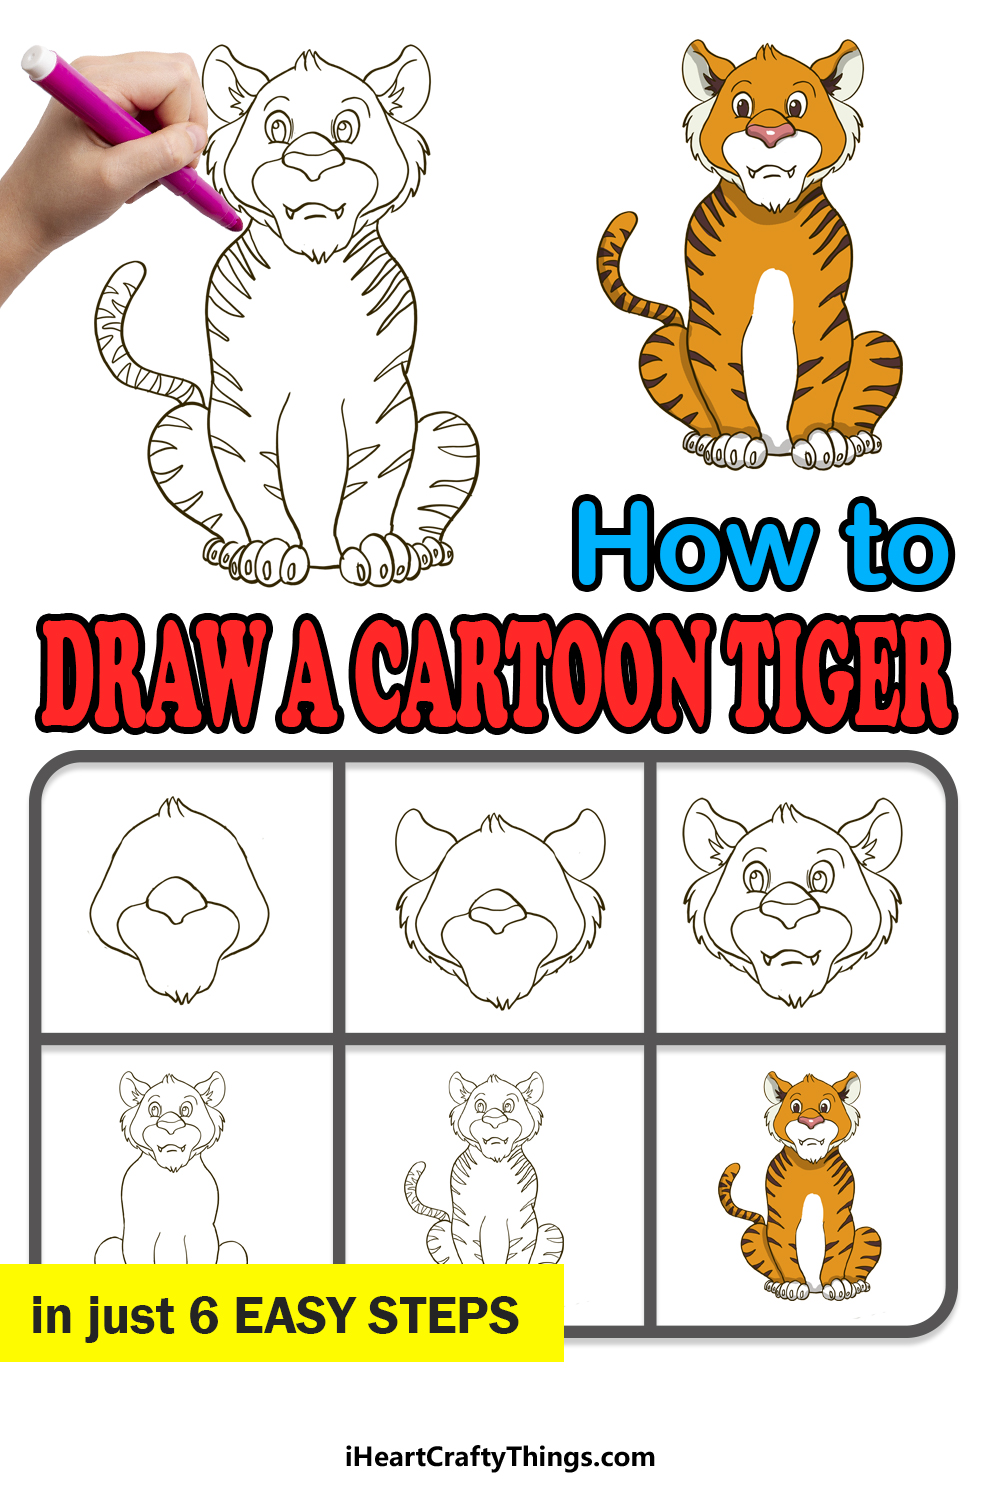 How to Draw A Cartoon Tiger step by step guide